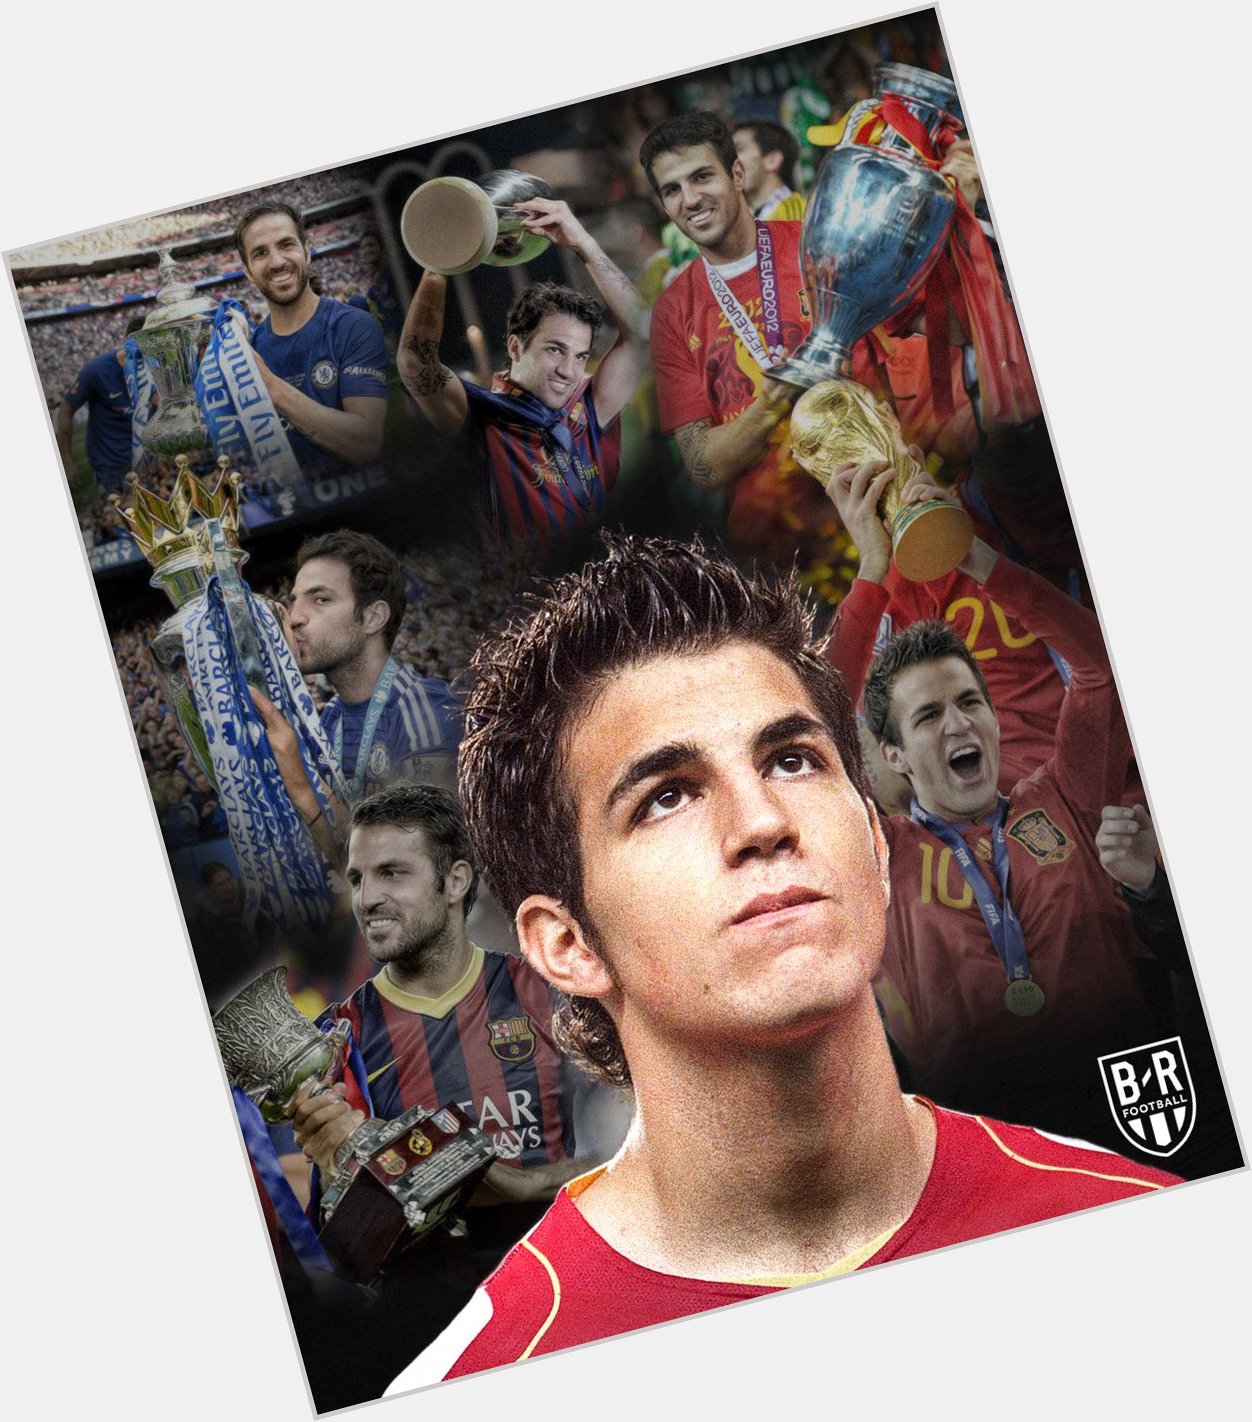 Happy 35th birthday to Cesc Fabregas, a true legend of the game  